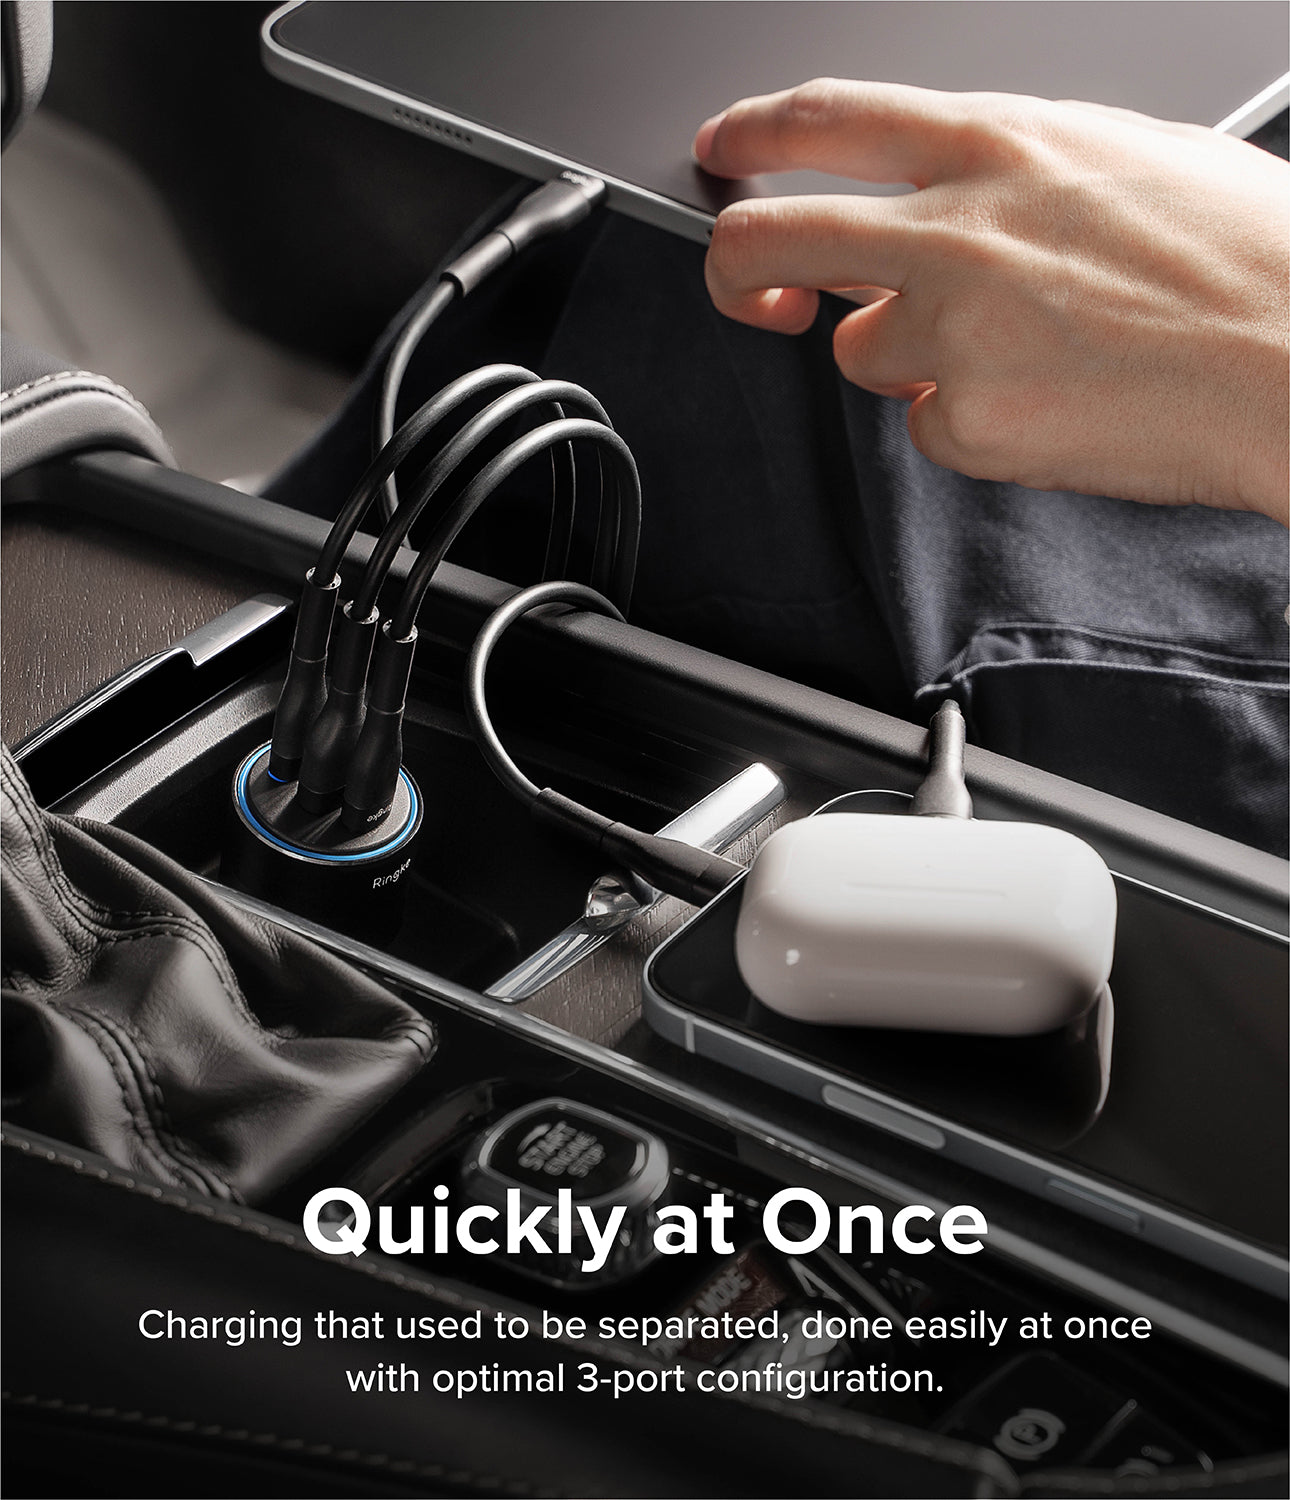 Ringke 3-Port Car Fast Charger - Quickly at Once. Charging that used to be separated, done easily at once with optimal 3-port configuration.